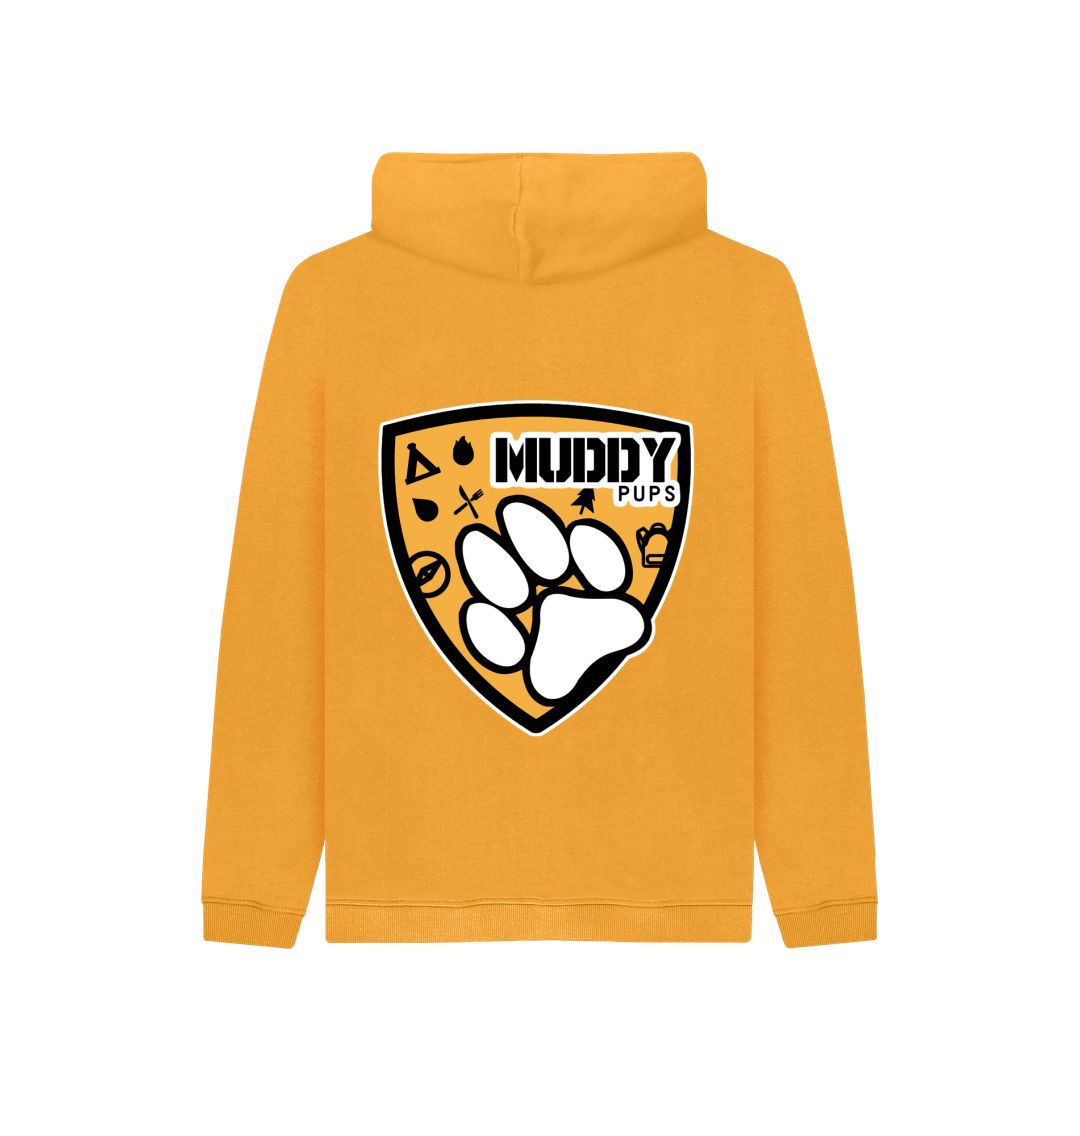 UKSN Muddy Pups / MUD Dogs Official Charter Childs Hoodie